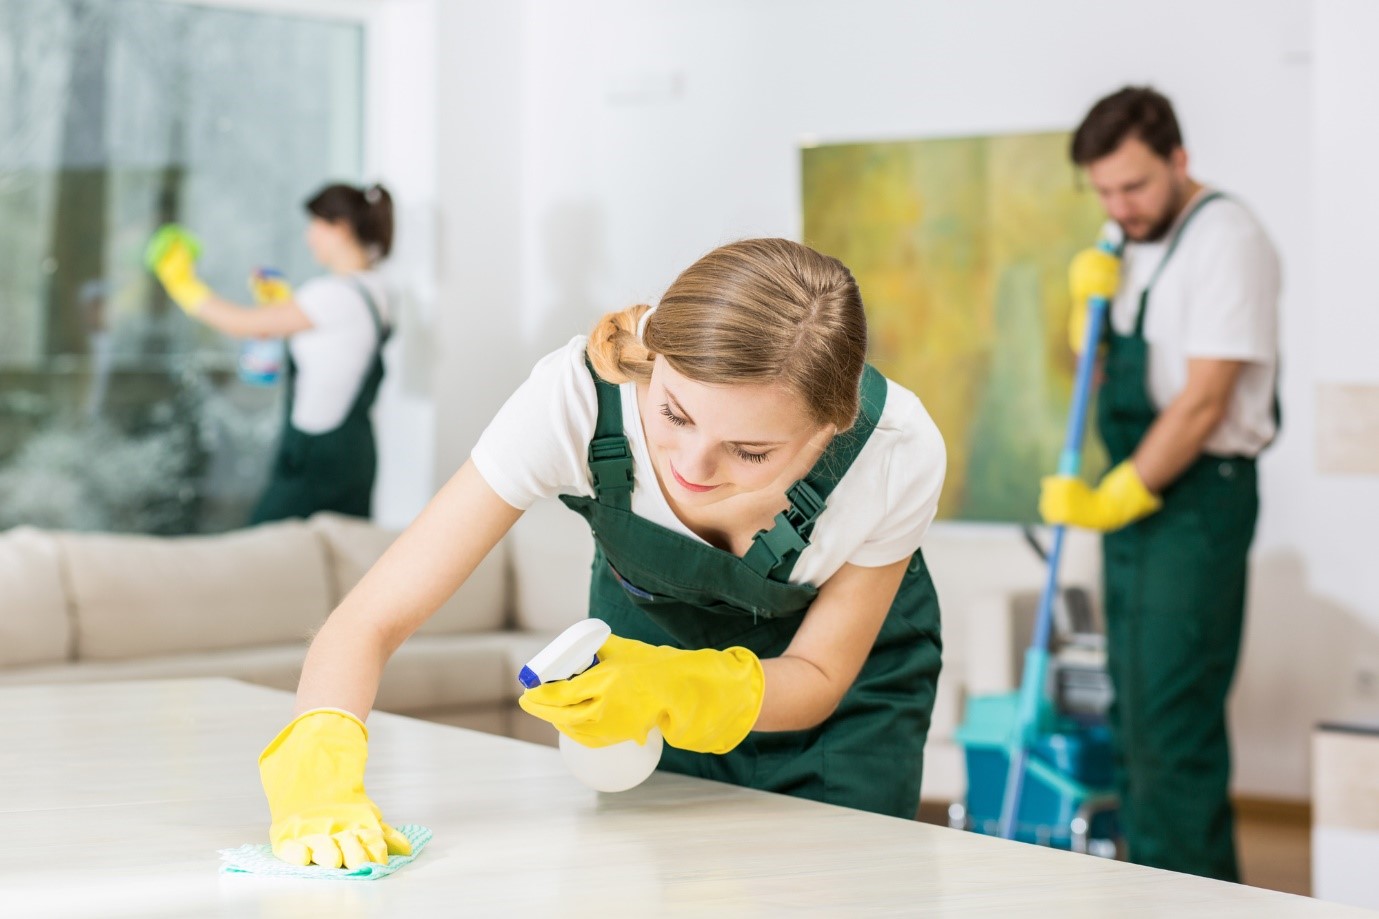 image - How to Find the Best Professional Maid Cleaning Service for Your Needs